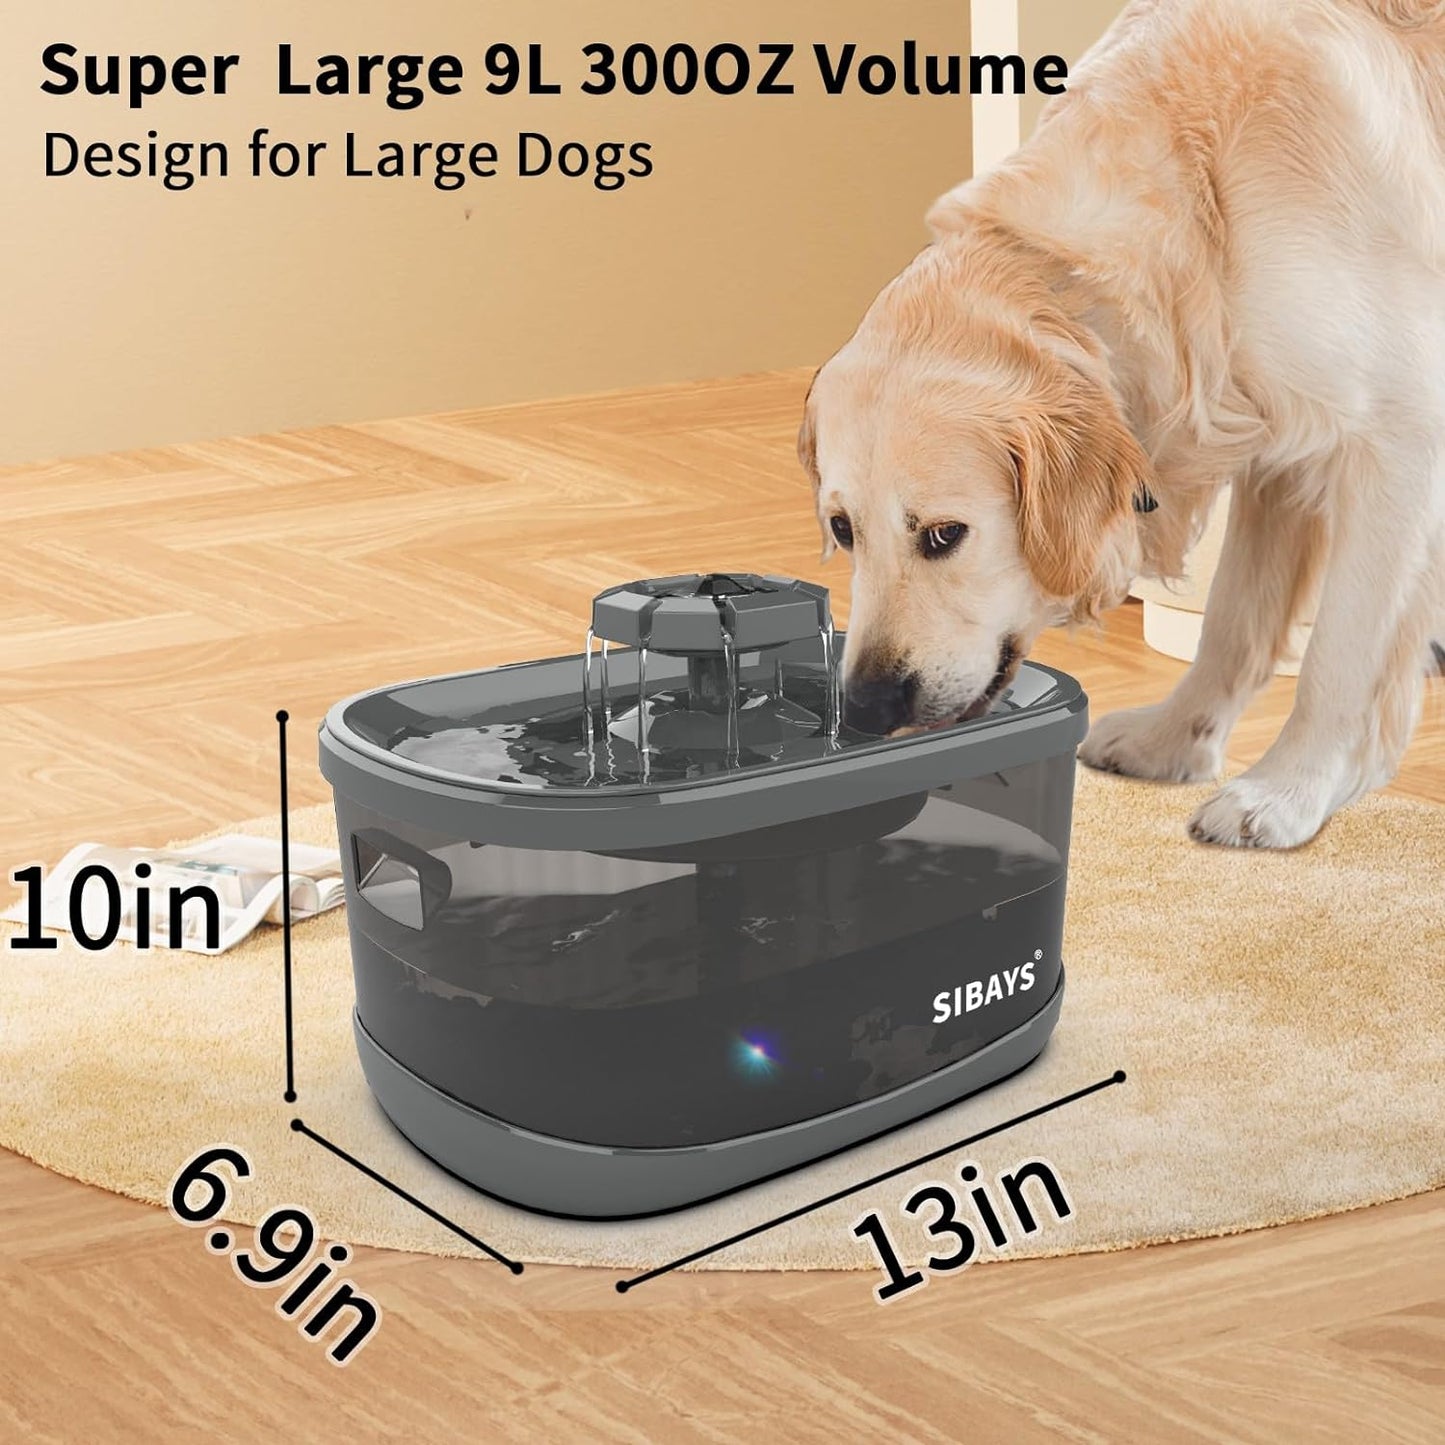 SIBAYS 9L 300OZ 2.4GAL Dog Water Fountain for Large Dogs,3 Sprouts Pet Water Fountain for Dogs,Multi Pets,3 in 1 Light,Automaticlly Super Quiet,4 Layer